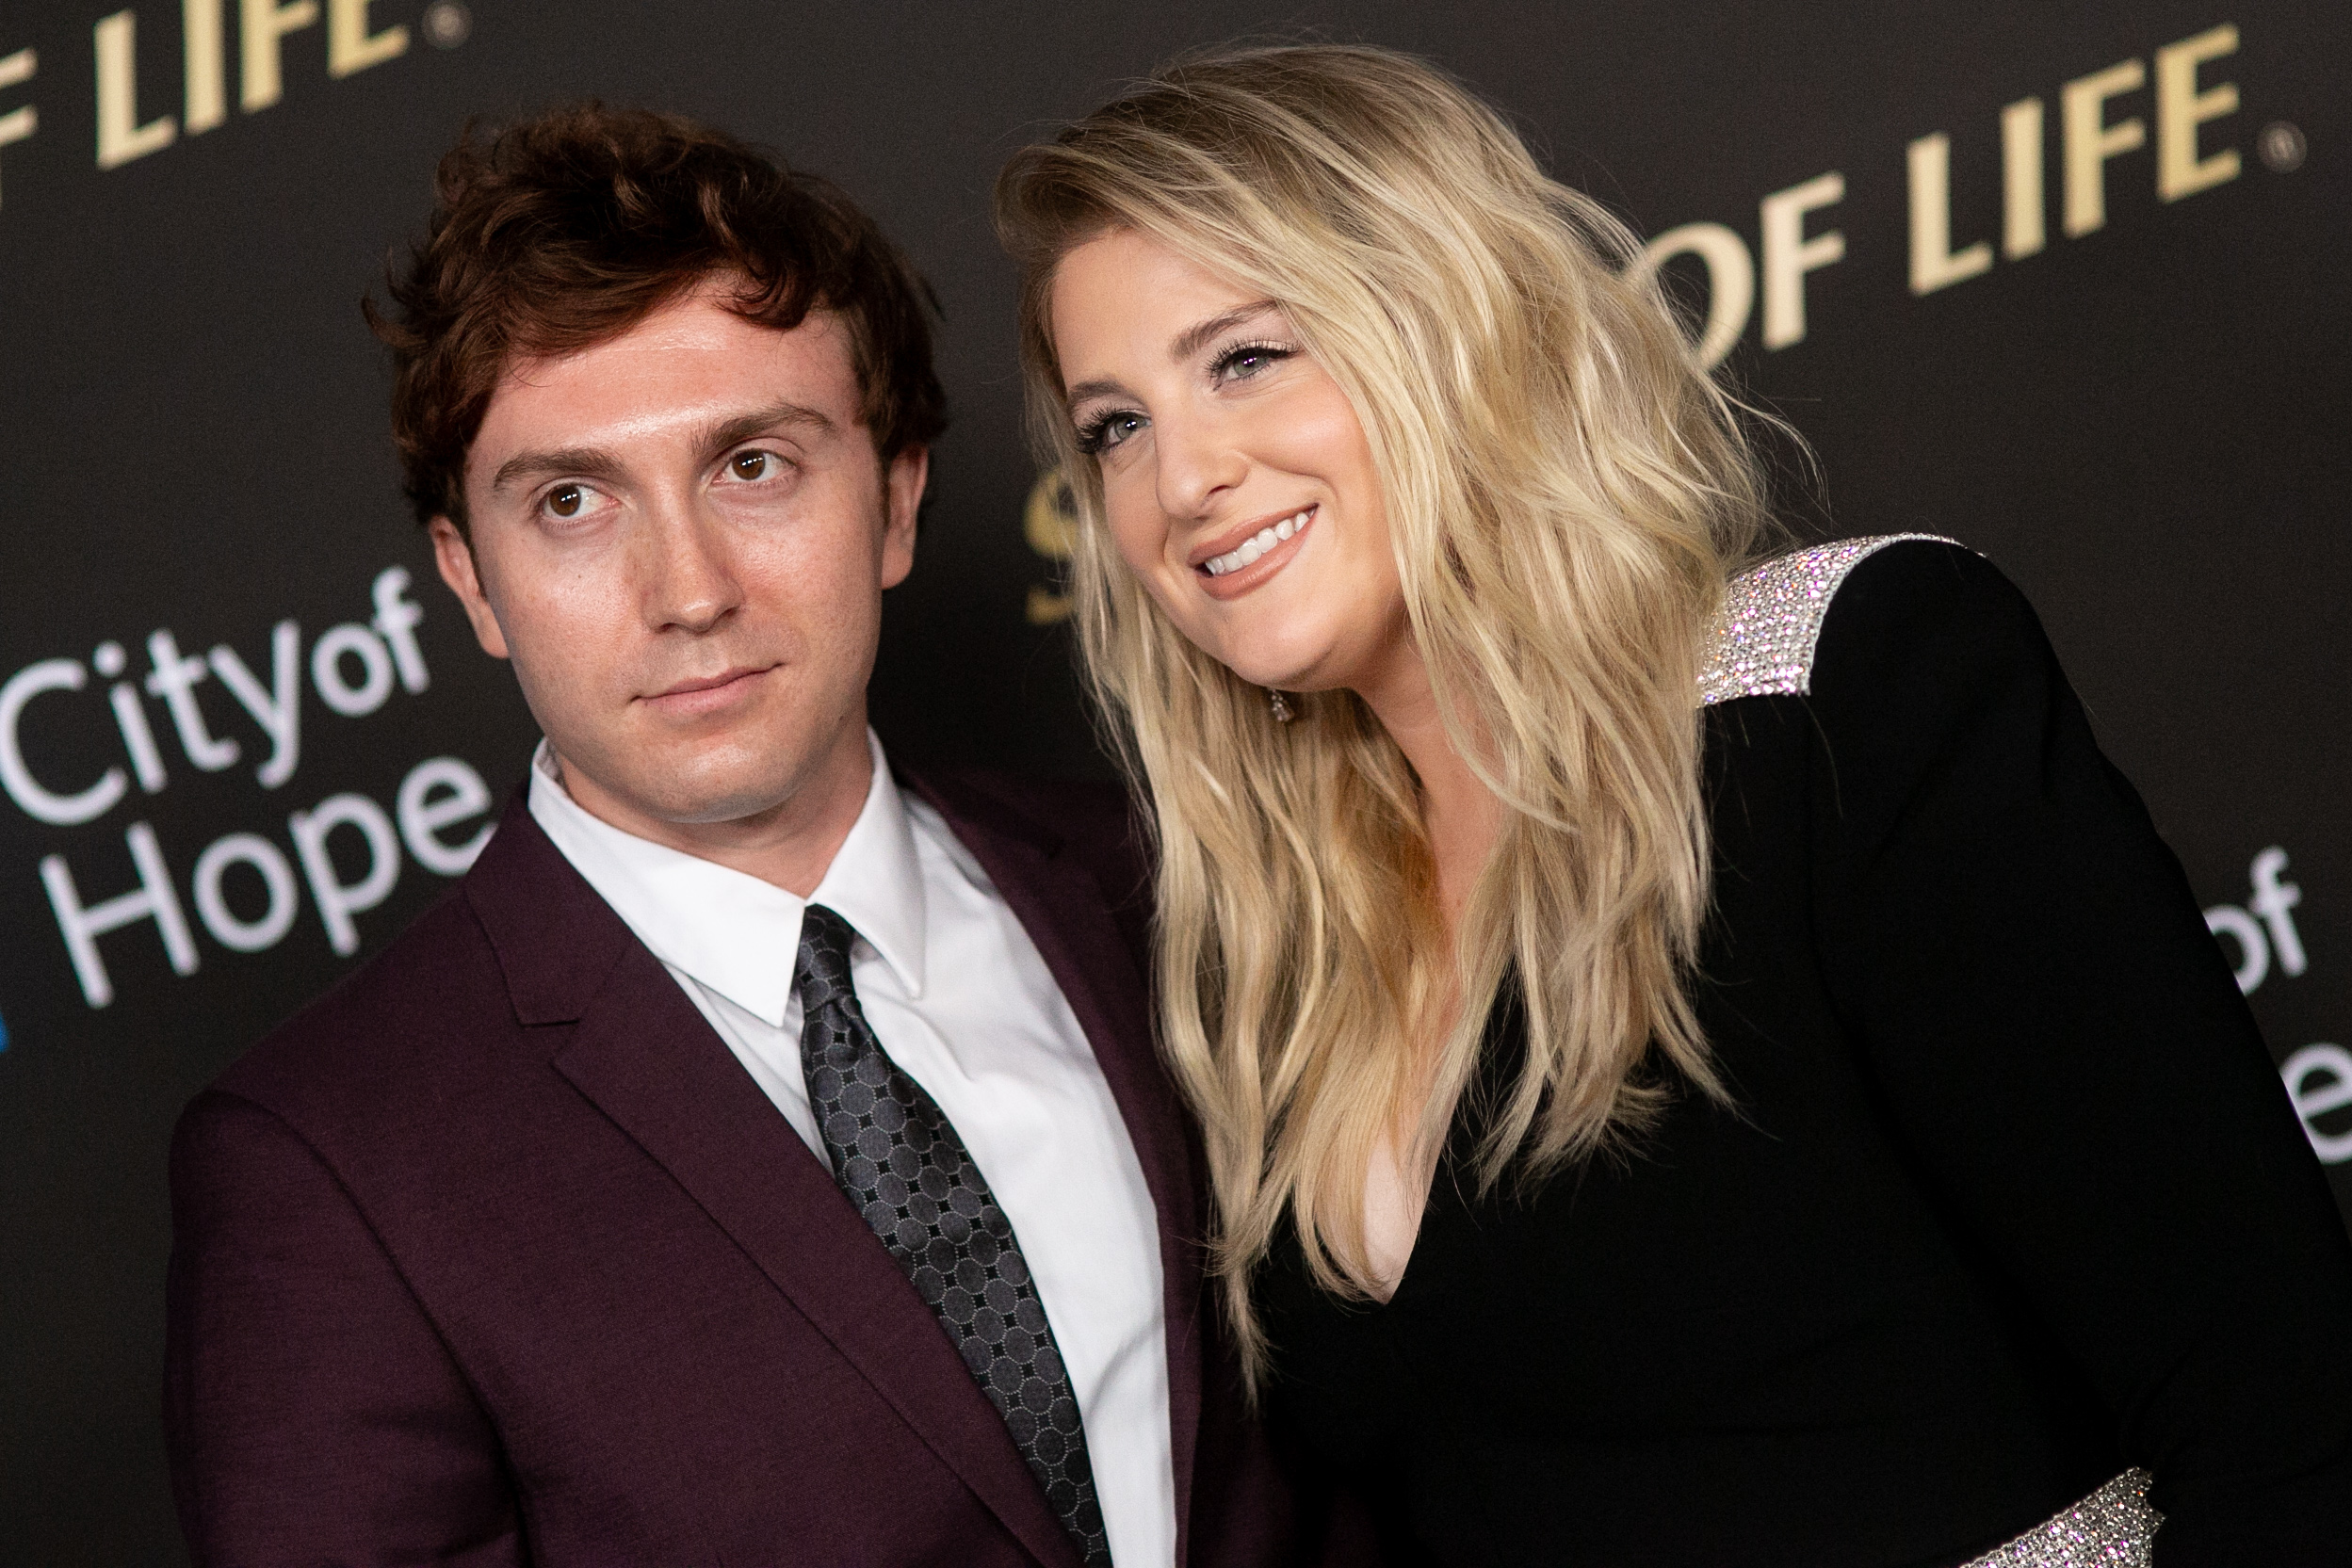 Daryl Sabara and Meghan Trainor arrive for City Of Hope's Spirit Of Life 2019 Gala at The Barker Hanger on October 10, 2019 in Santa Monica, California.